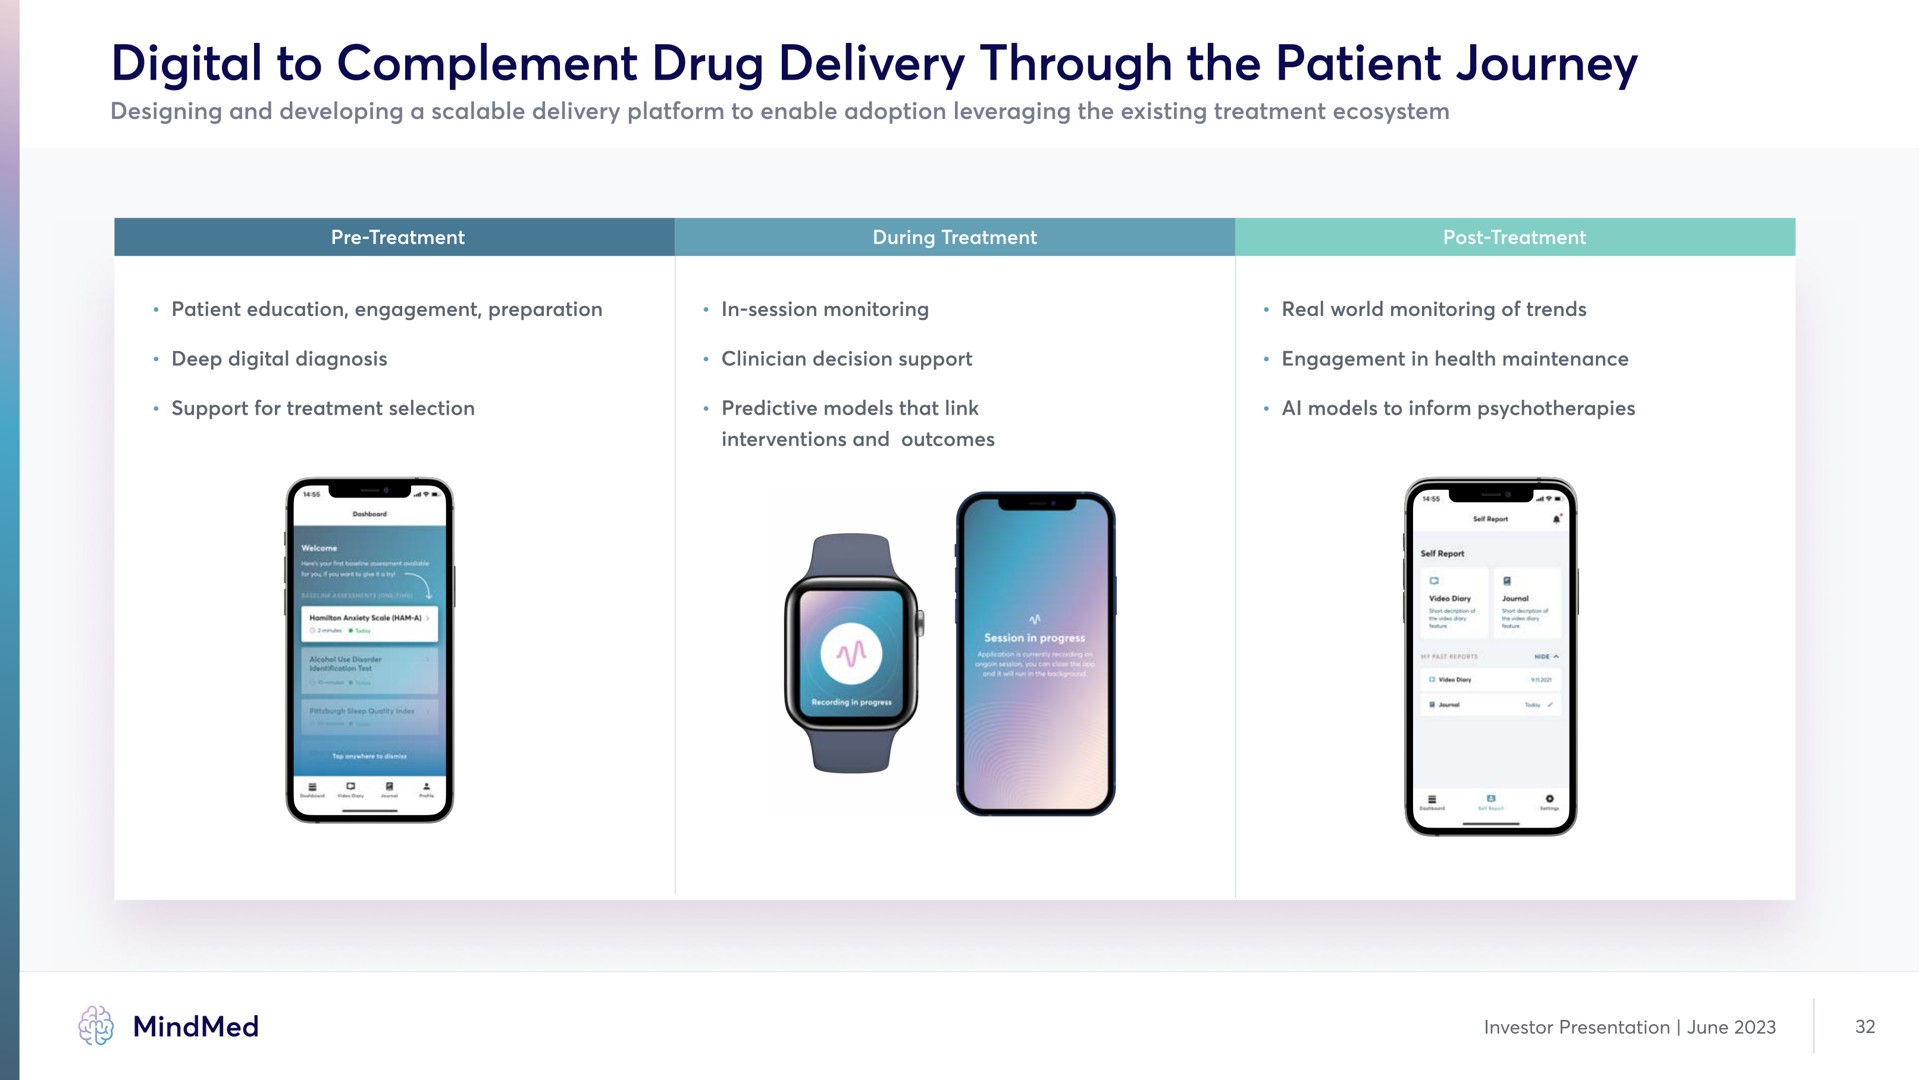 digital to complement drug delivery through the patient journey | MindMed